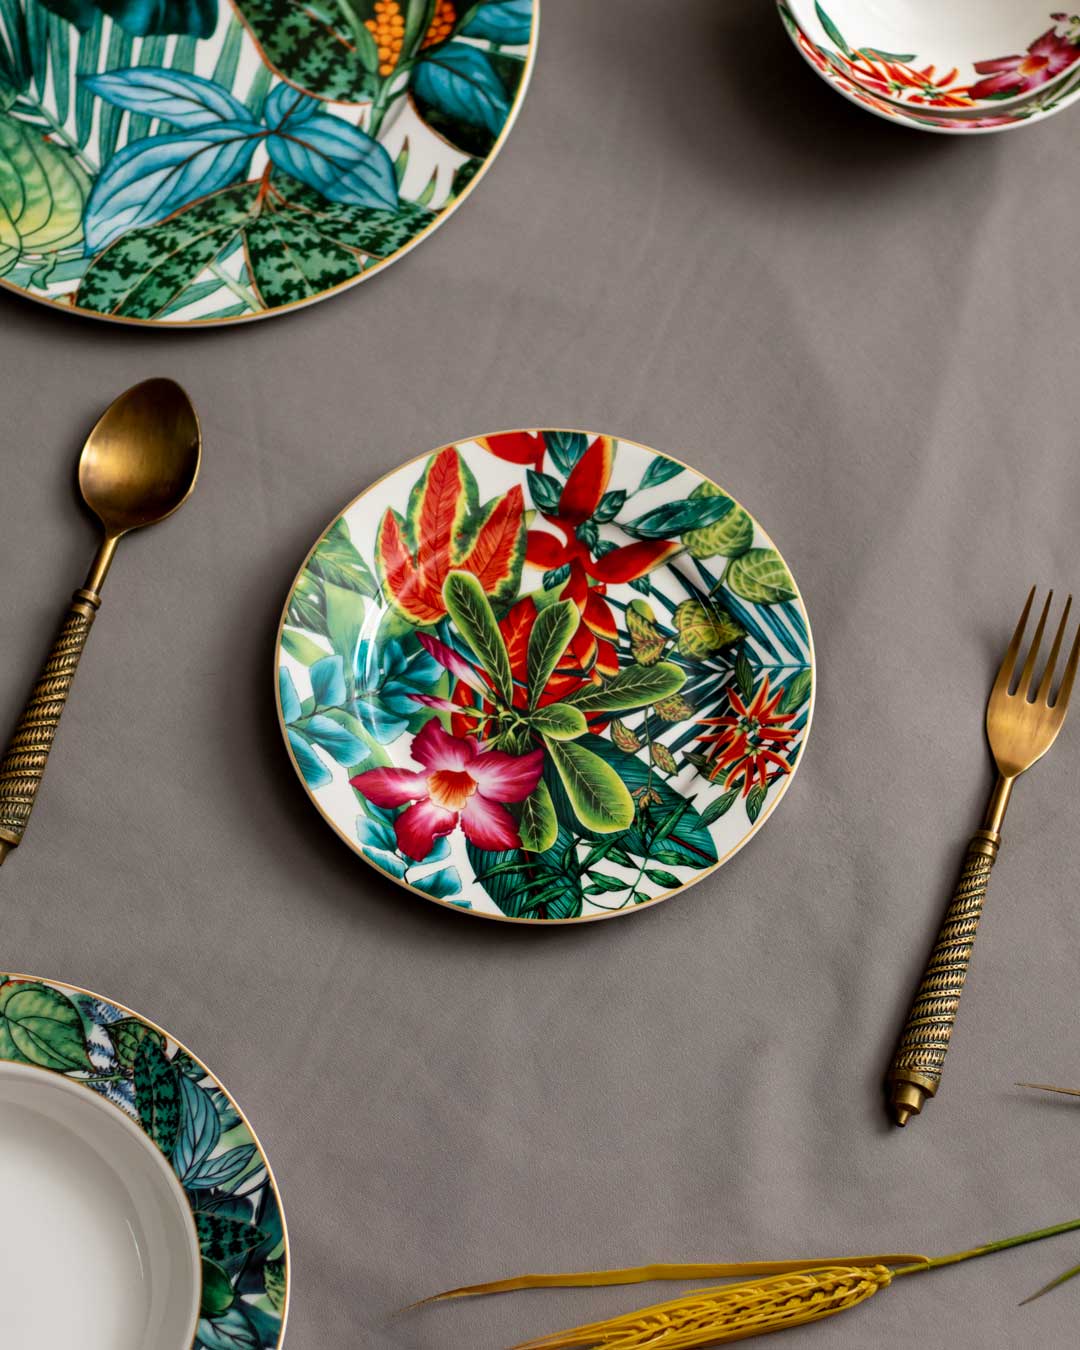 Leafy Elegance Quarter Plate with vibrant tropical leaf and flower design, accompanied by antique gold cutlery, on a muted grey background, perfect for a botanical-themed table setting.